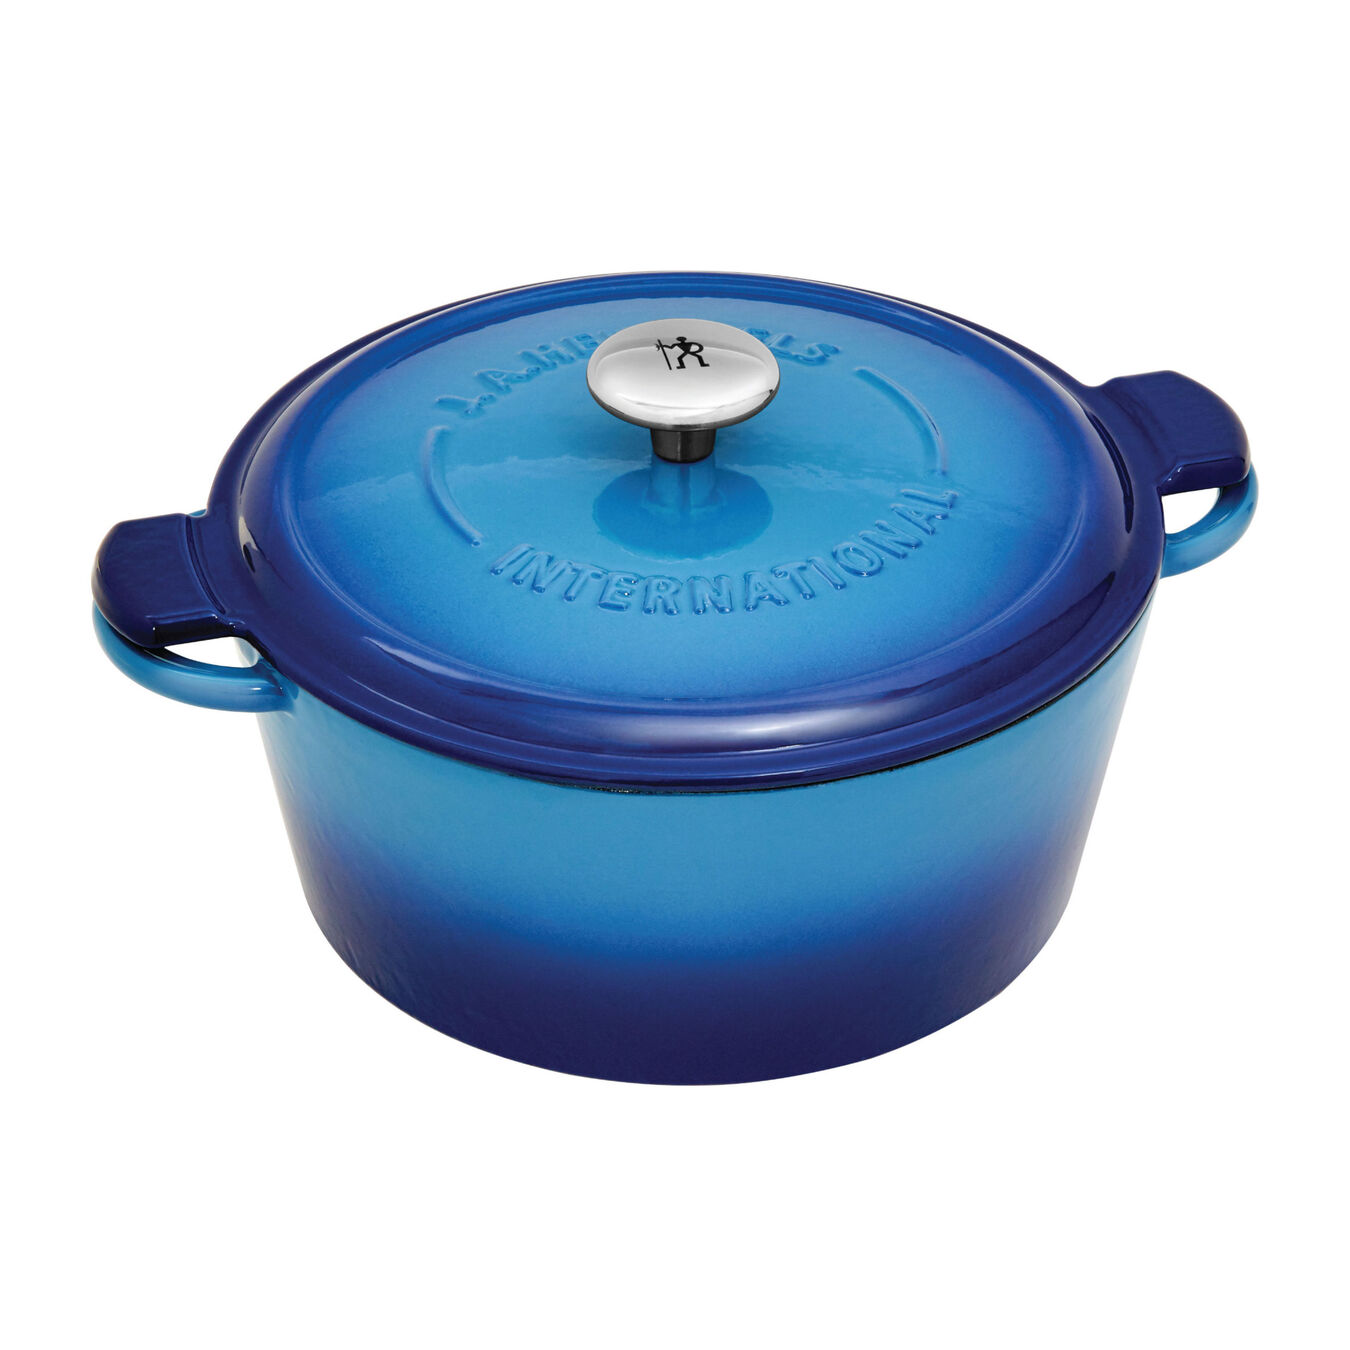 3.7 l cast iron round French oven, blue,,large 1